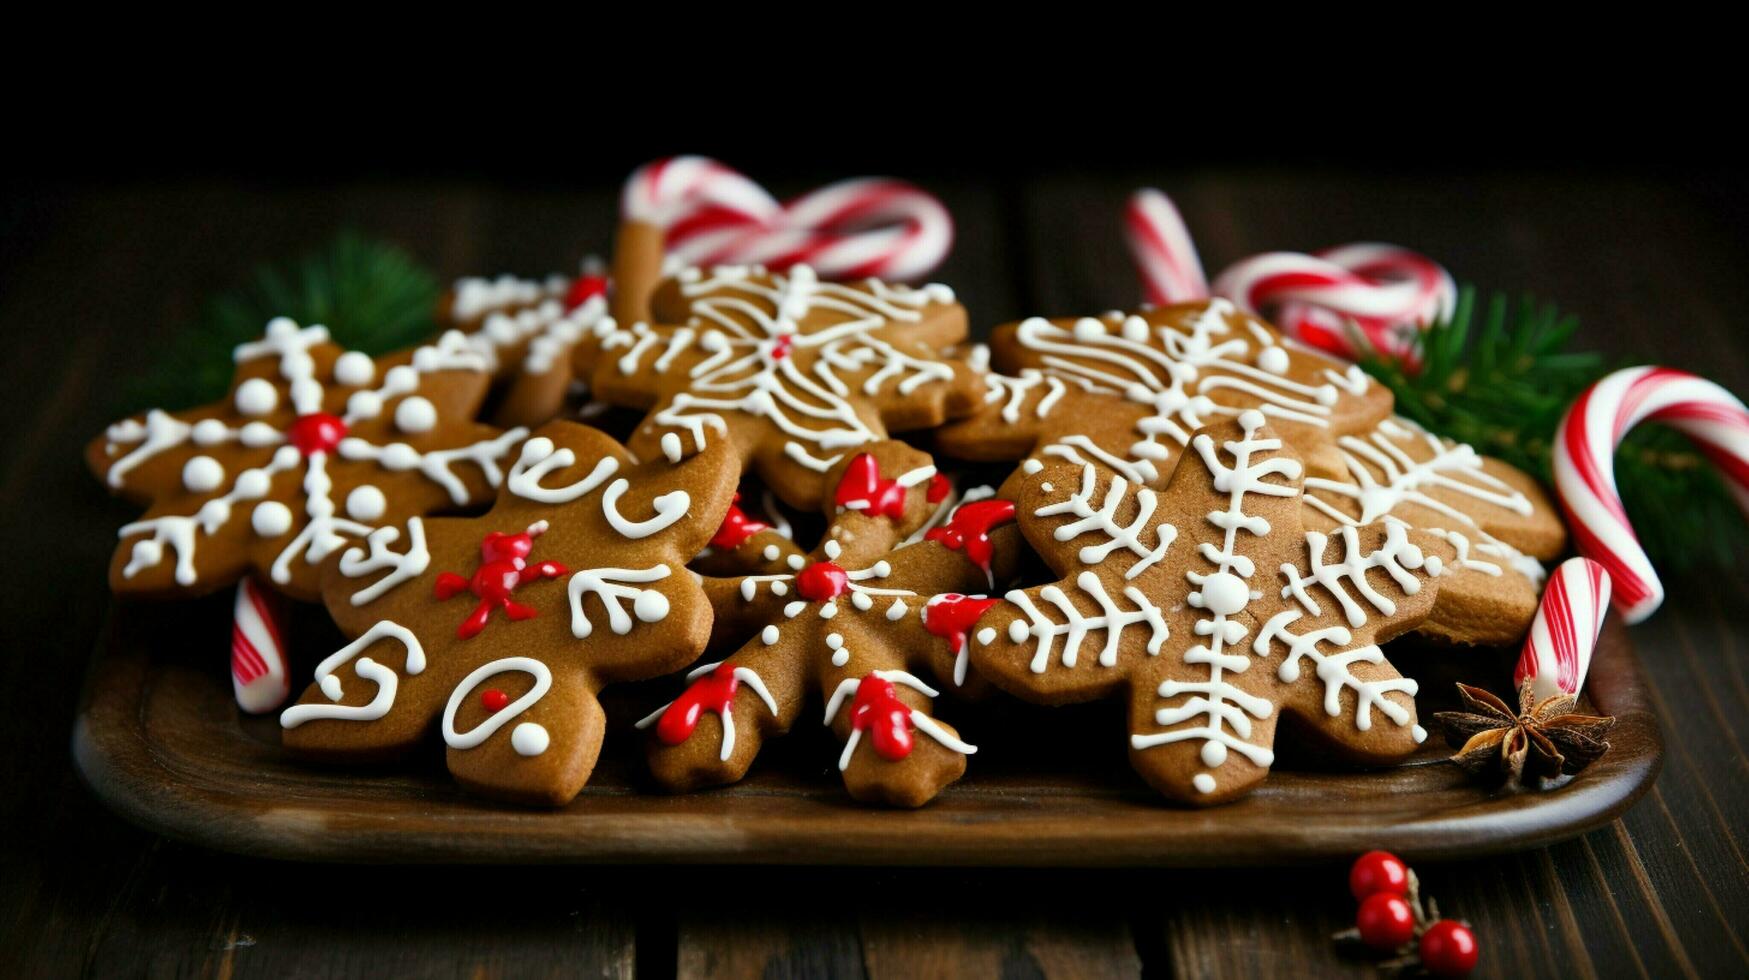 homemade gingerbread cookies with candy cane decoration photo